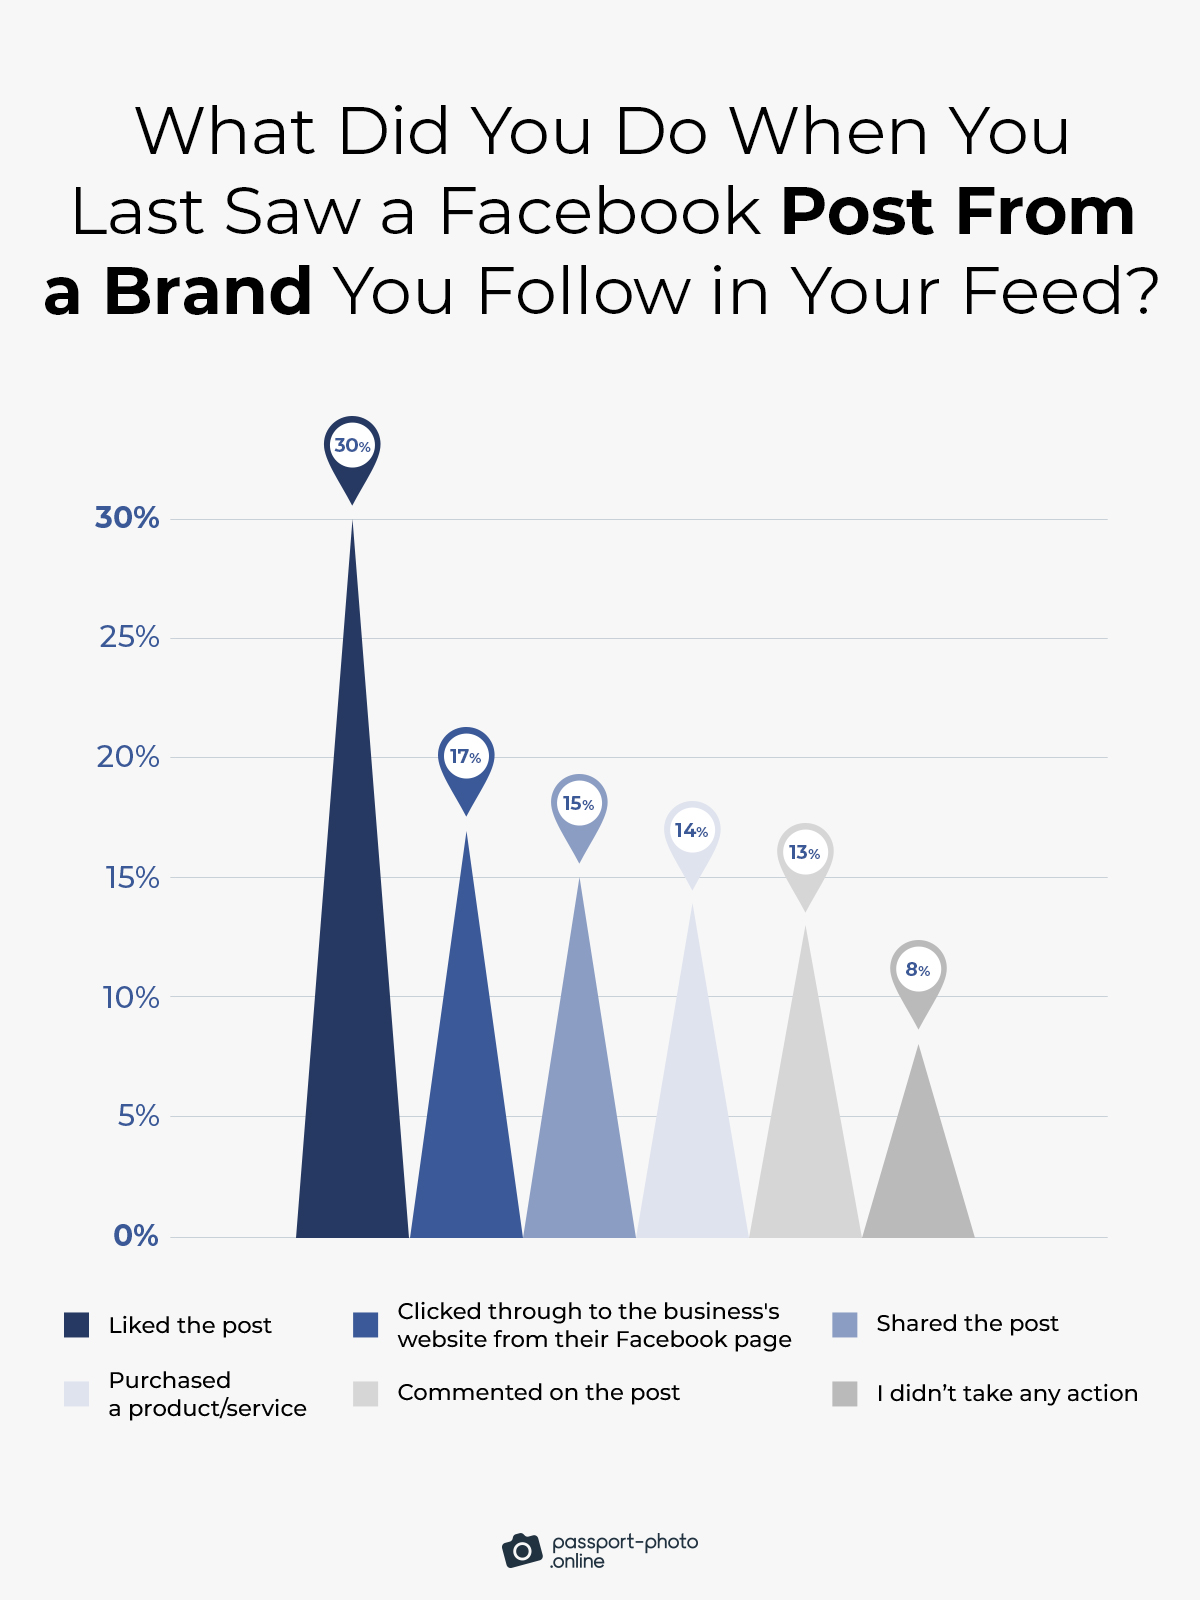 the most common action people on Facebook take upon seeing a post from their subscribed brand is "like" it